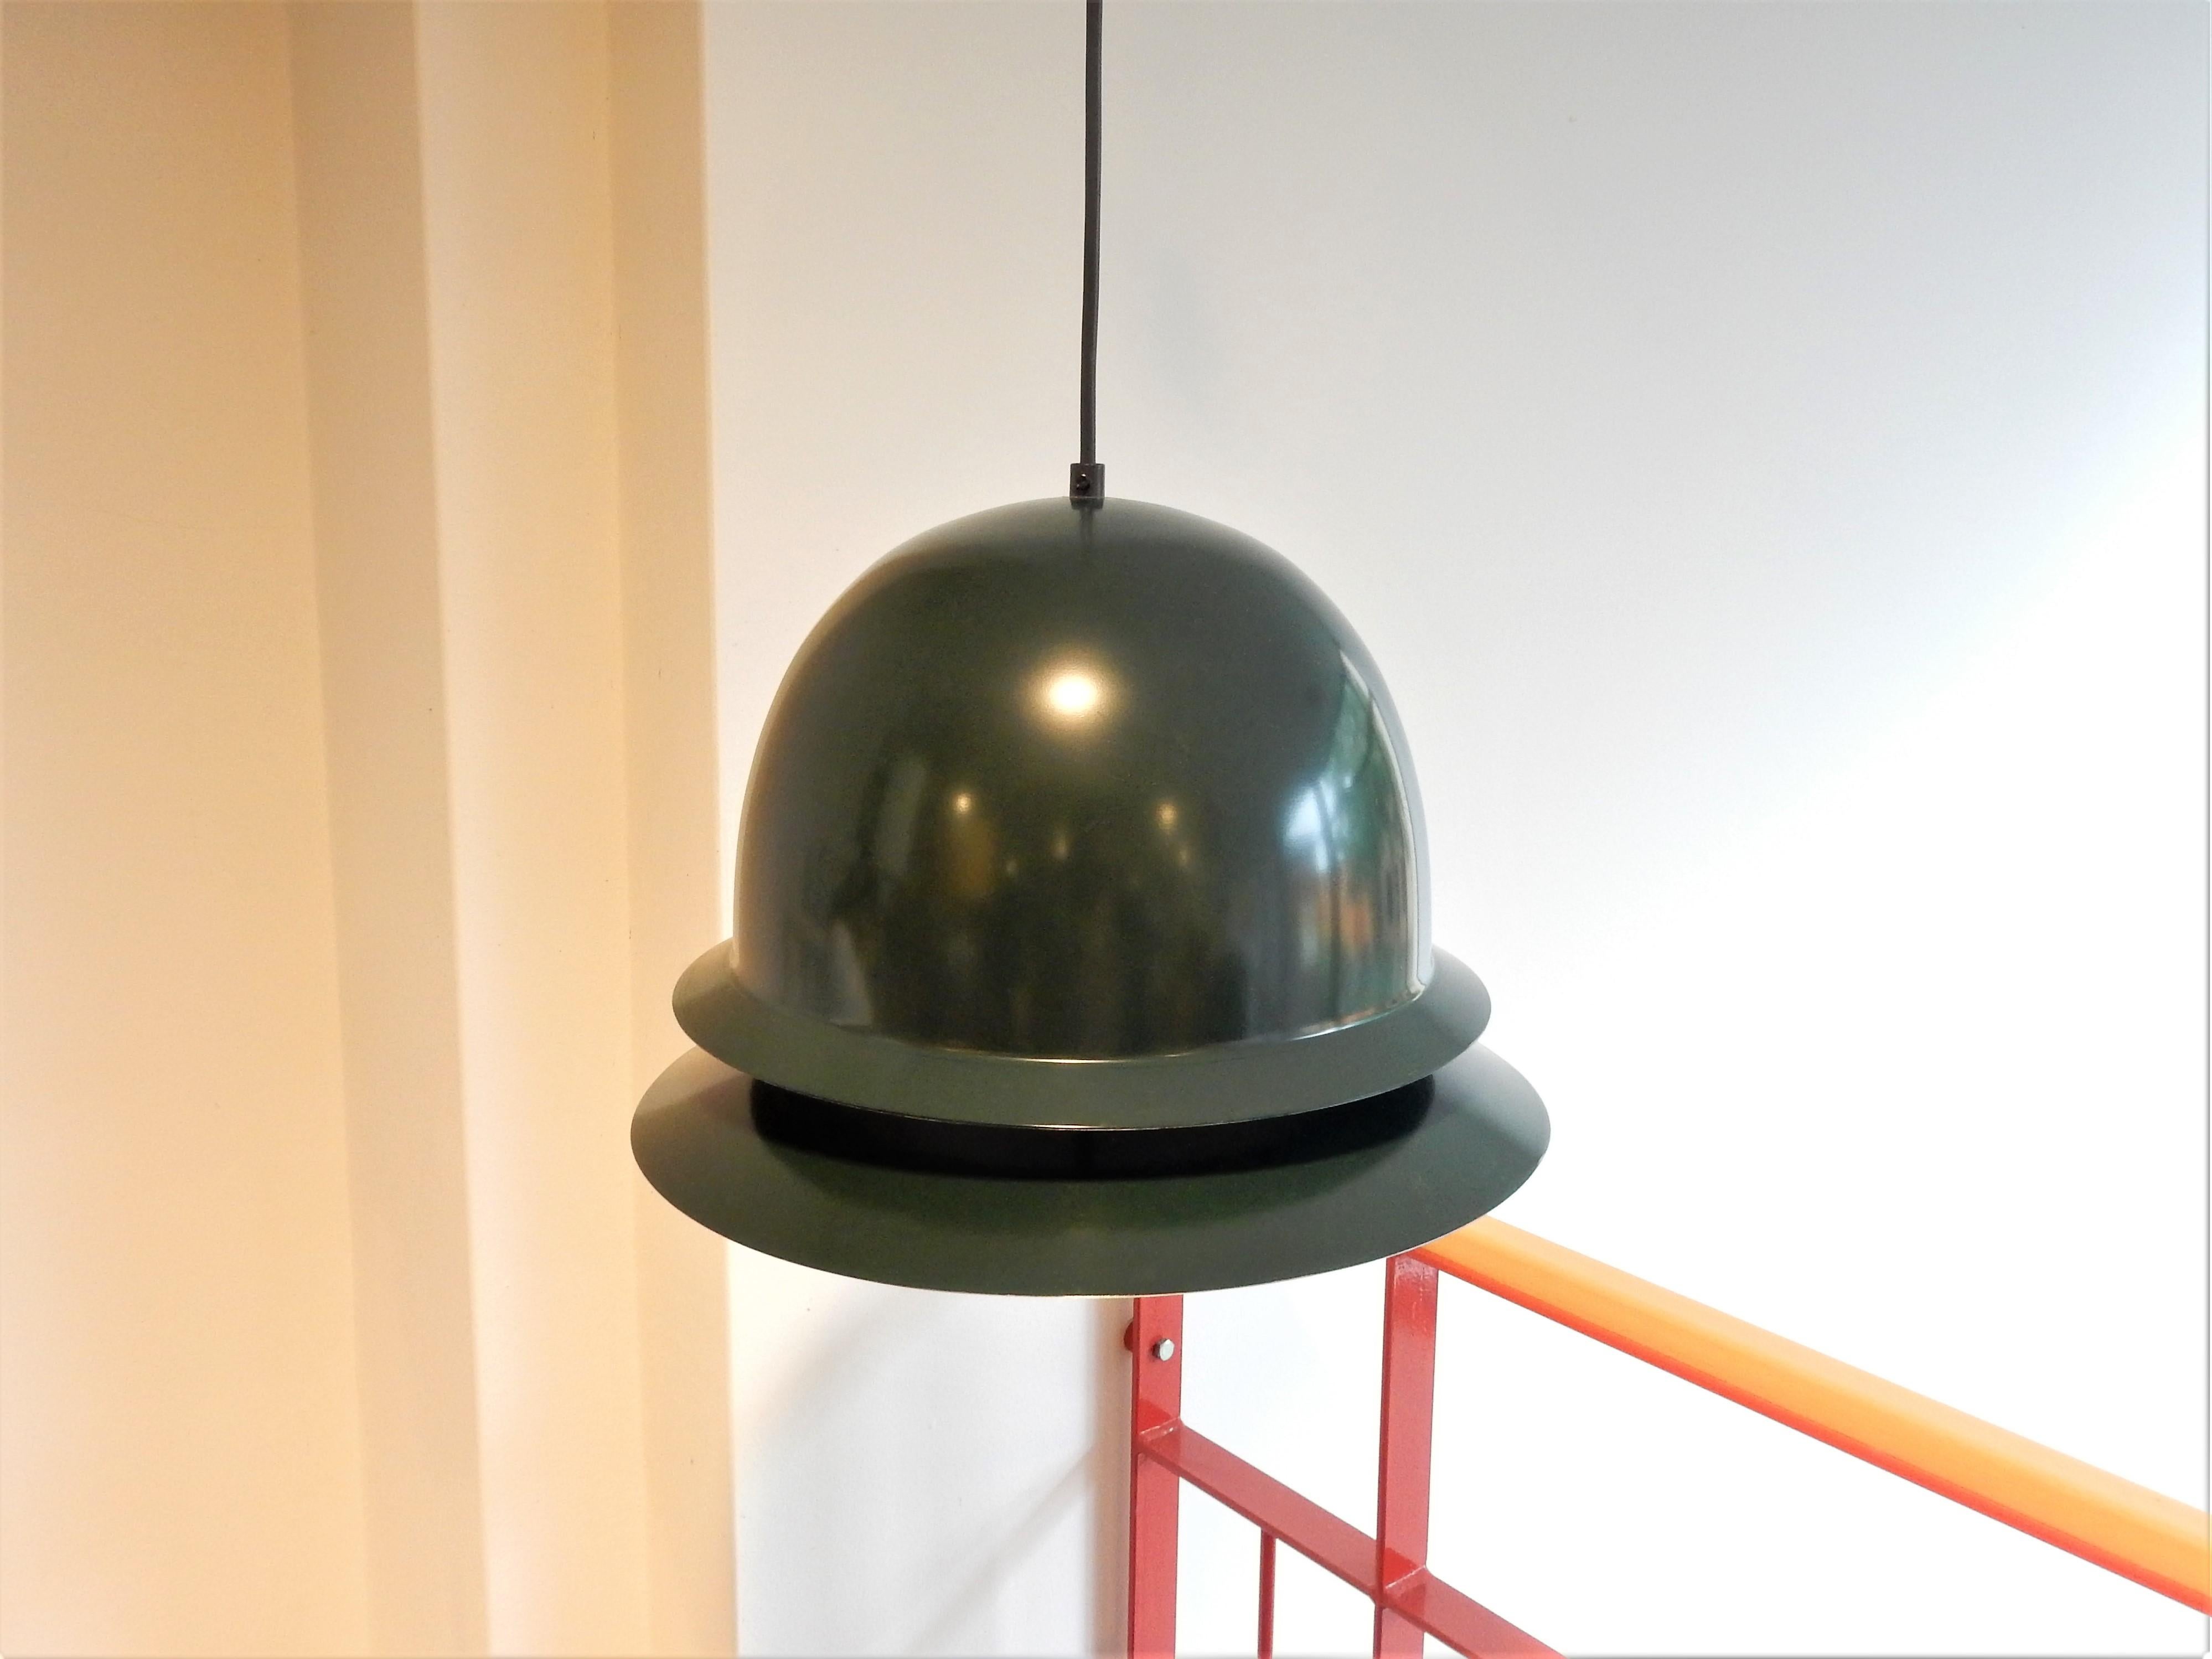 This 'bowler hat' shaped pendant lamp was designed by Hans-Agne Jakobsson for Svera. Most likely imported in the Netherlands by Hans Agne Jakobsson N.V. The lamp has 2 layers of dark green lacquered metal, that give a downward light. All in a very